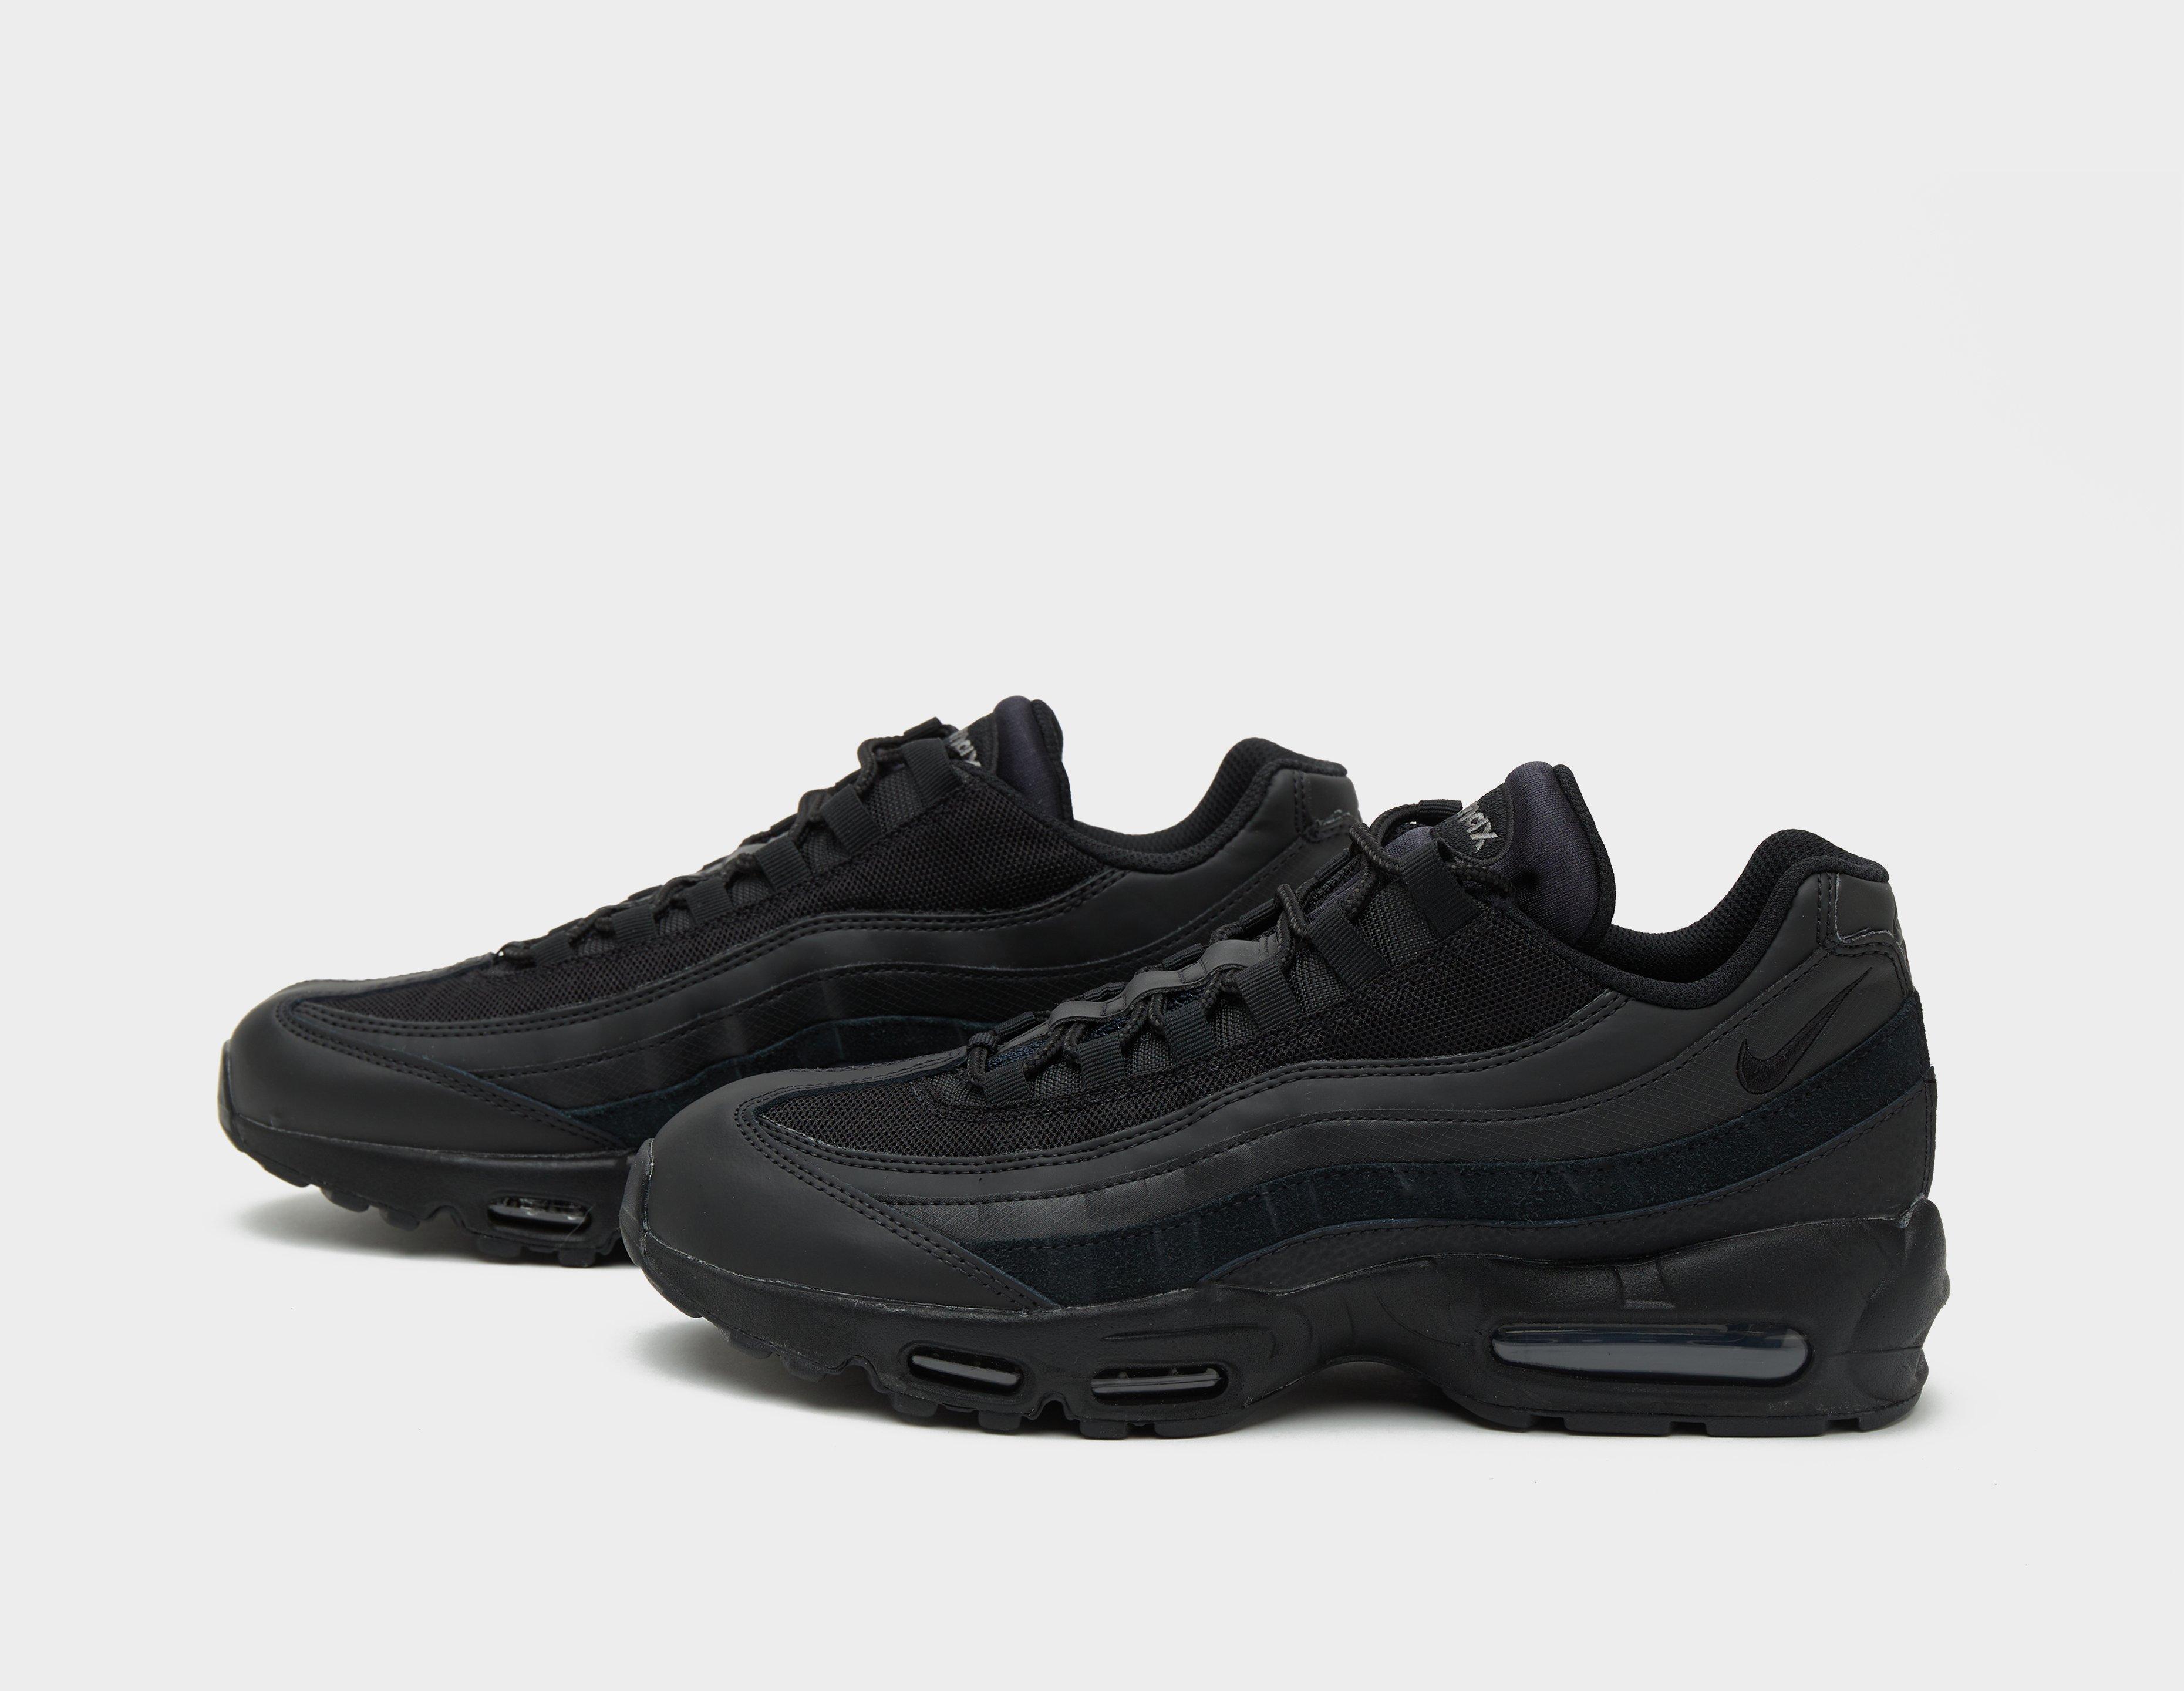 nike air max 95 leather